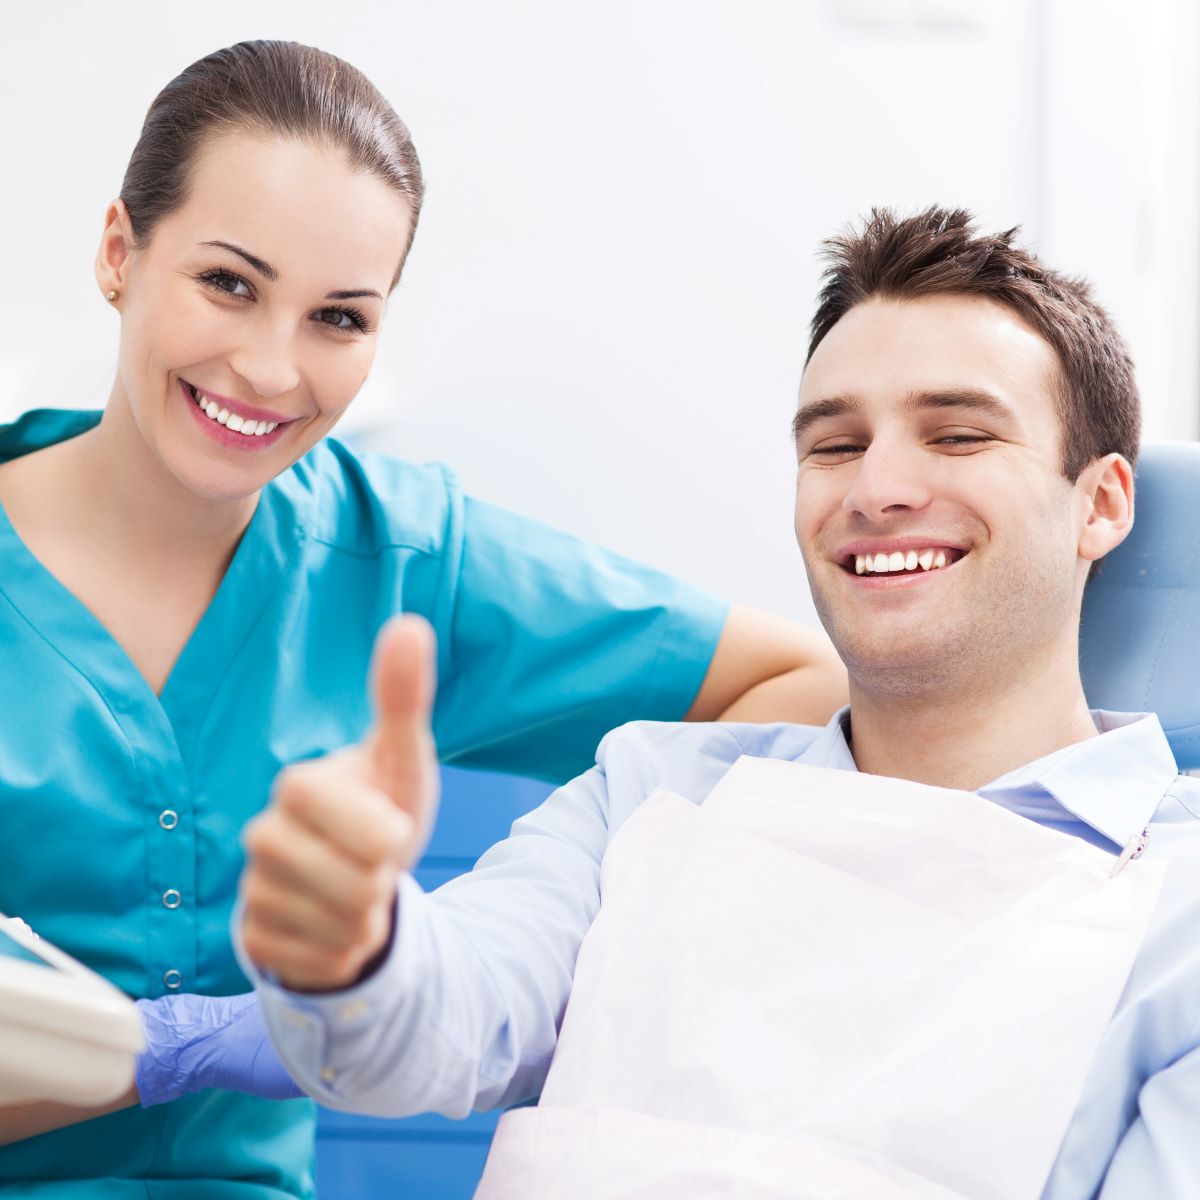 Patient happy and giving the thumbs up after selecting new dentist